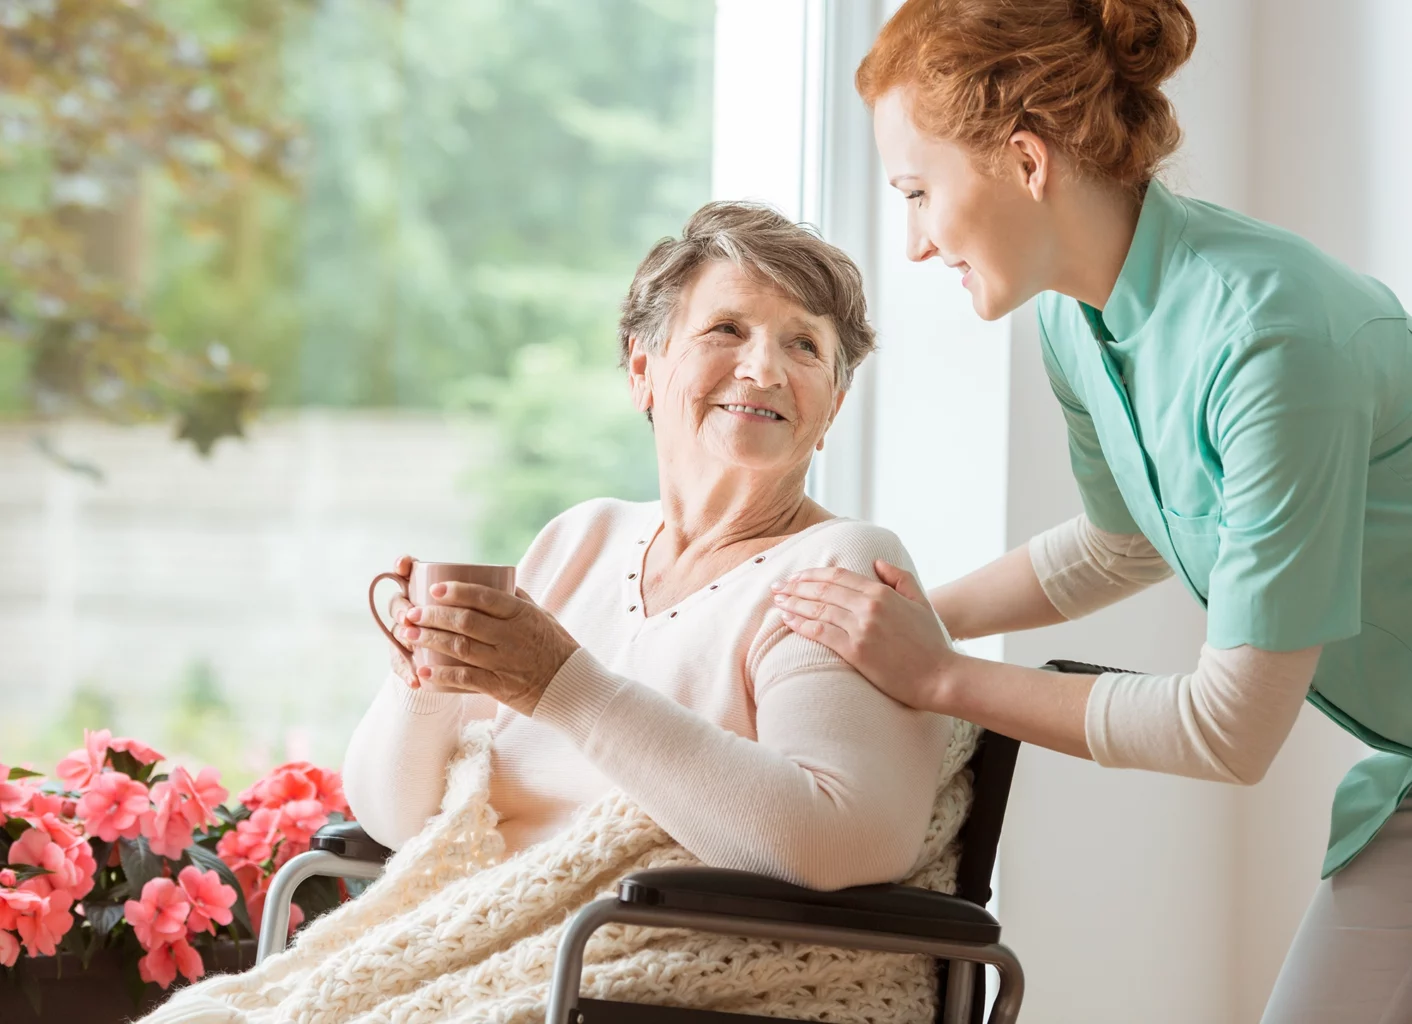 SALMON Health and Retirement staff member providing private care to a senior woman at home